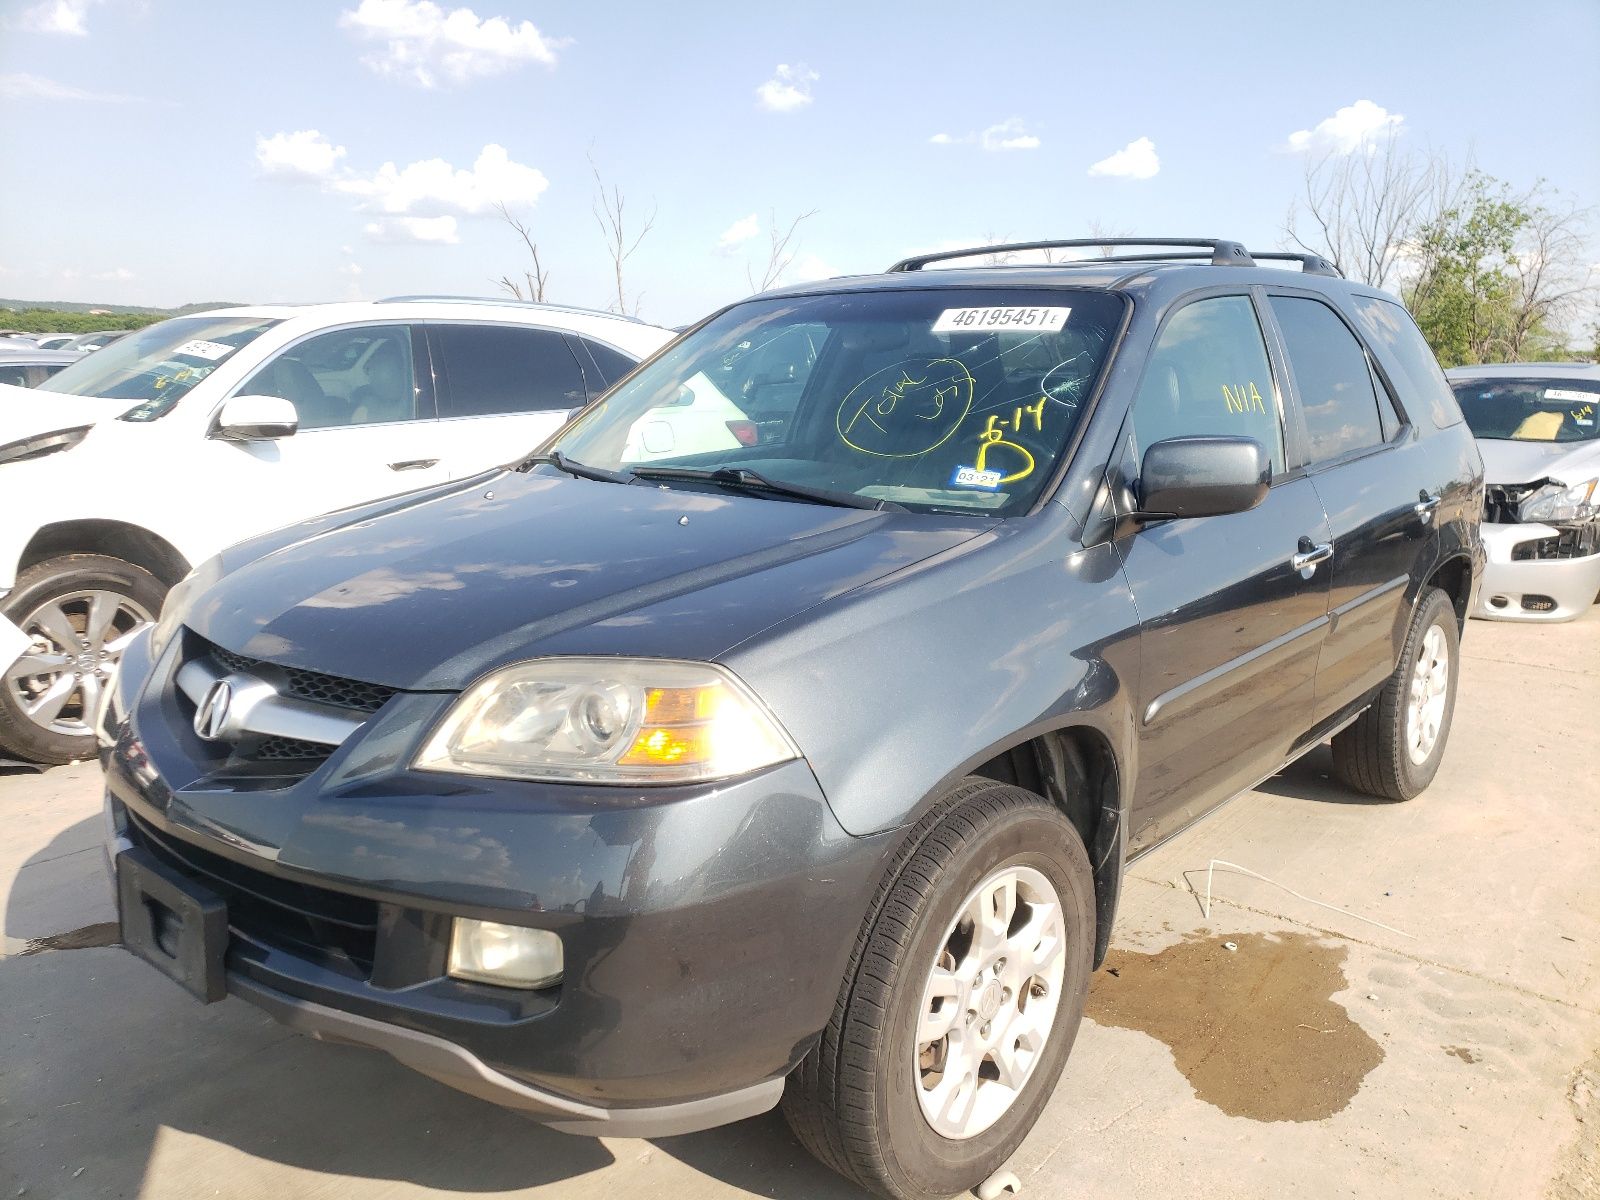 2 of 2HNYD18685H553241 Acura MDX 2005